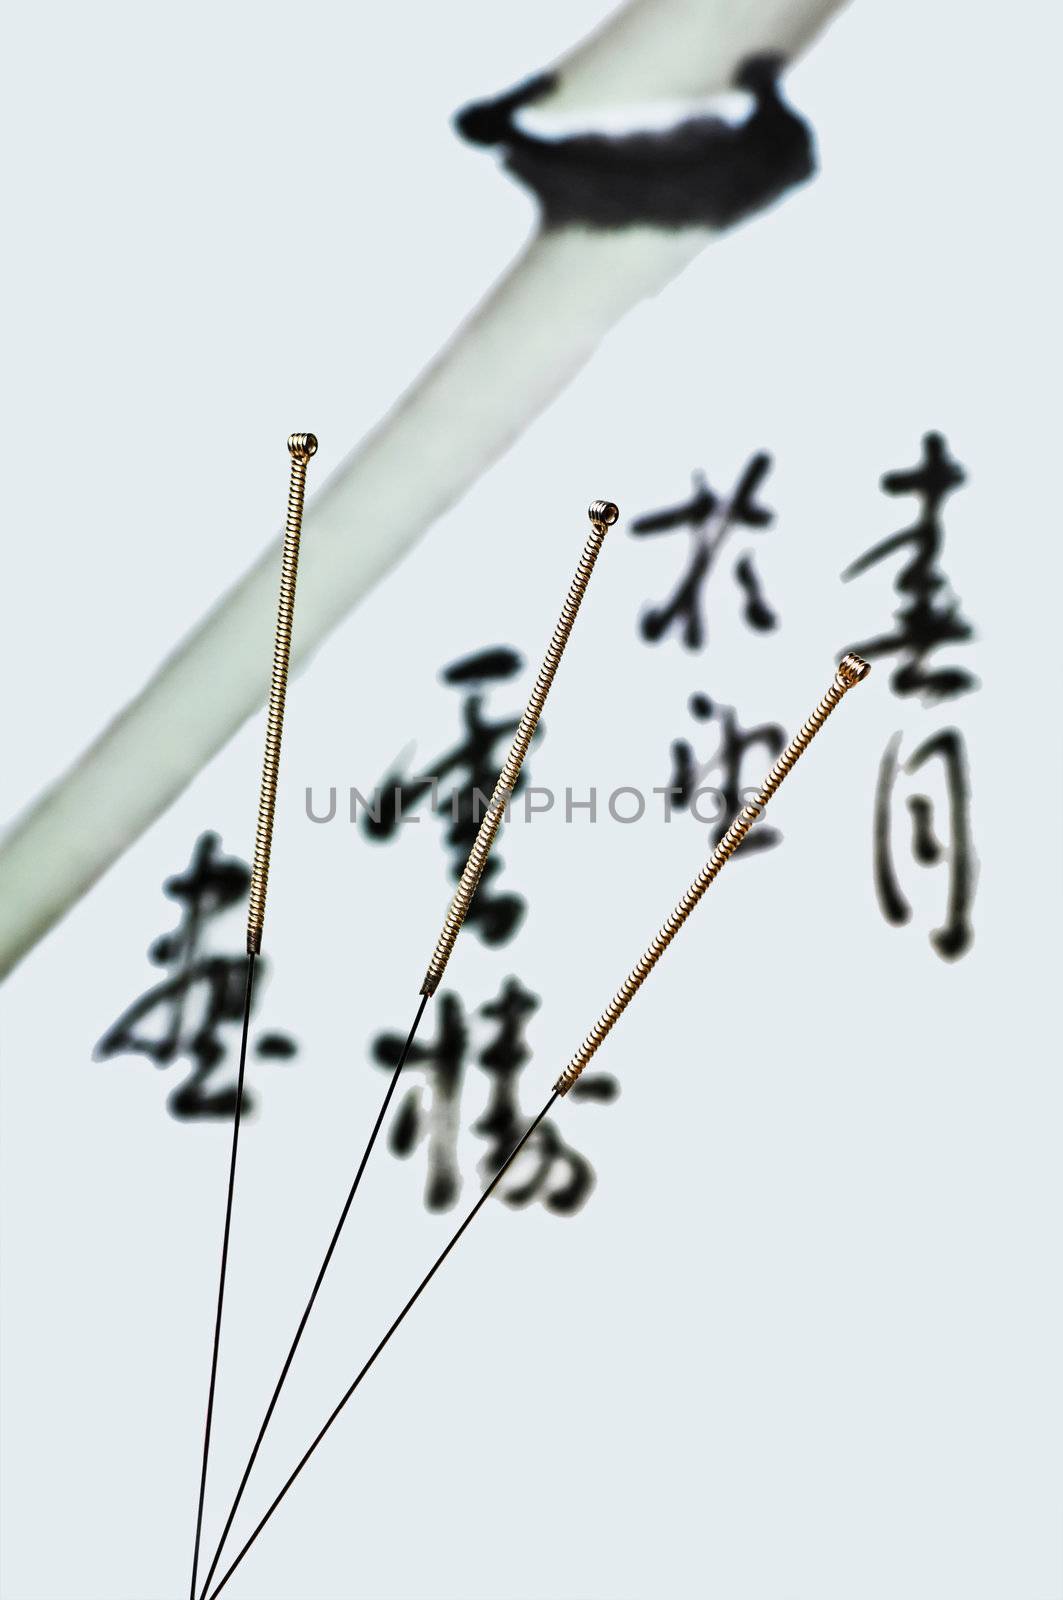 acupuncture needle by Jochen